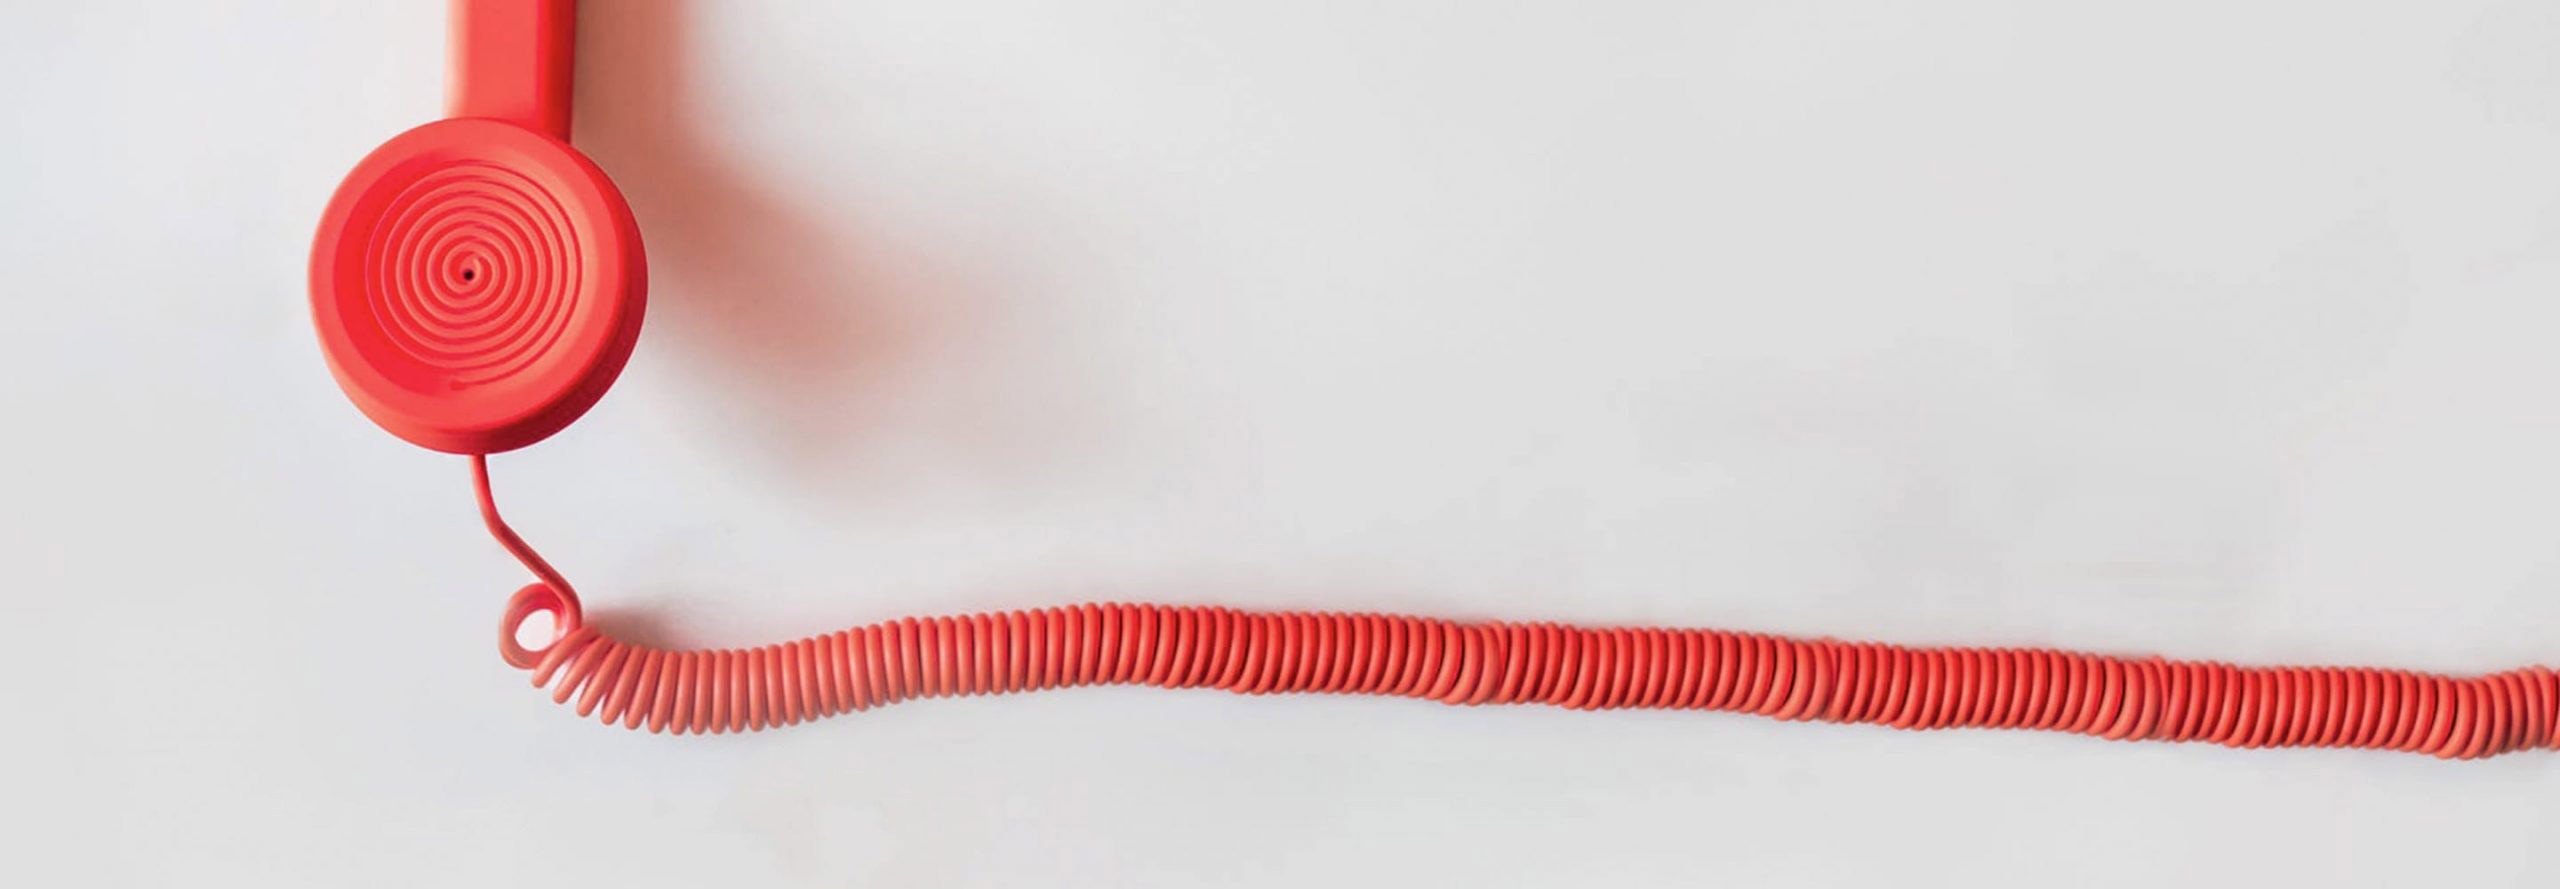 red corded telephone